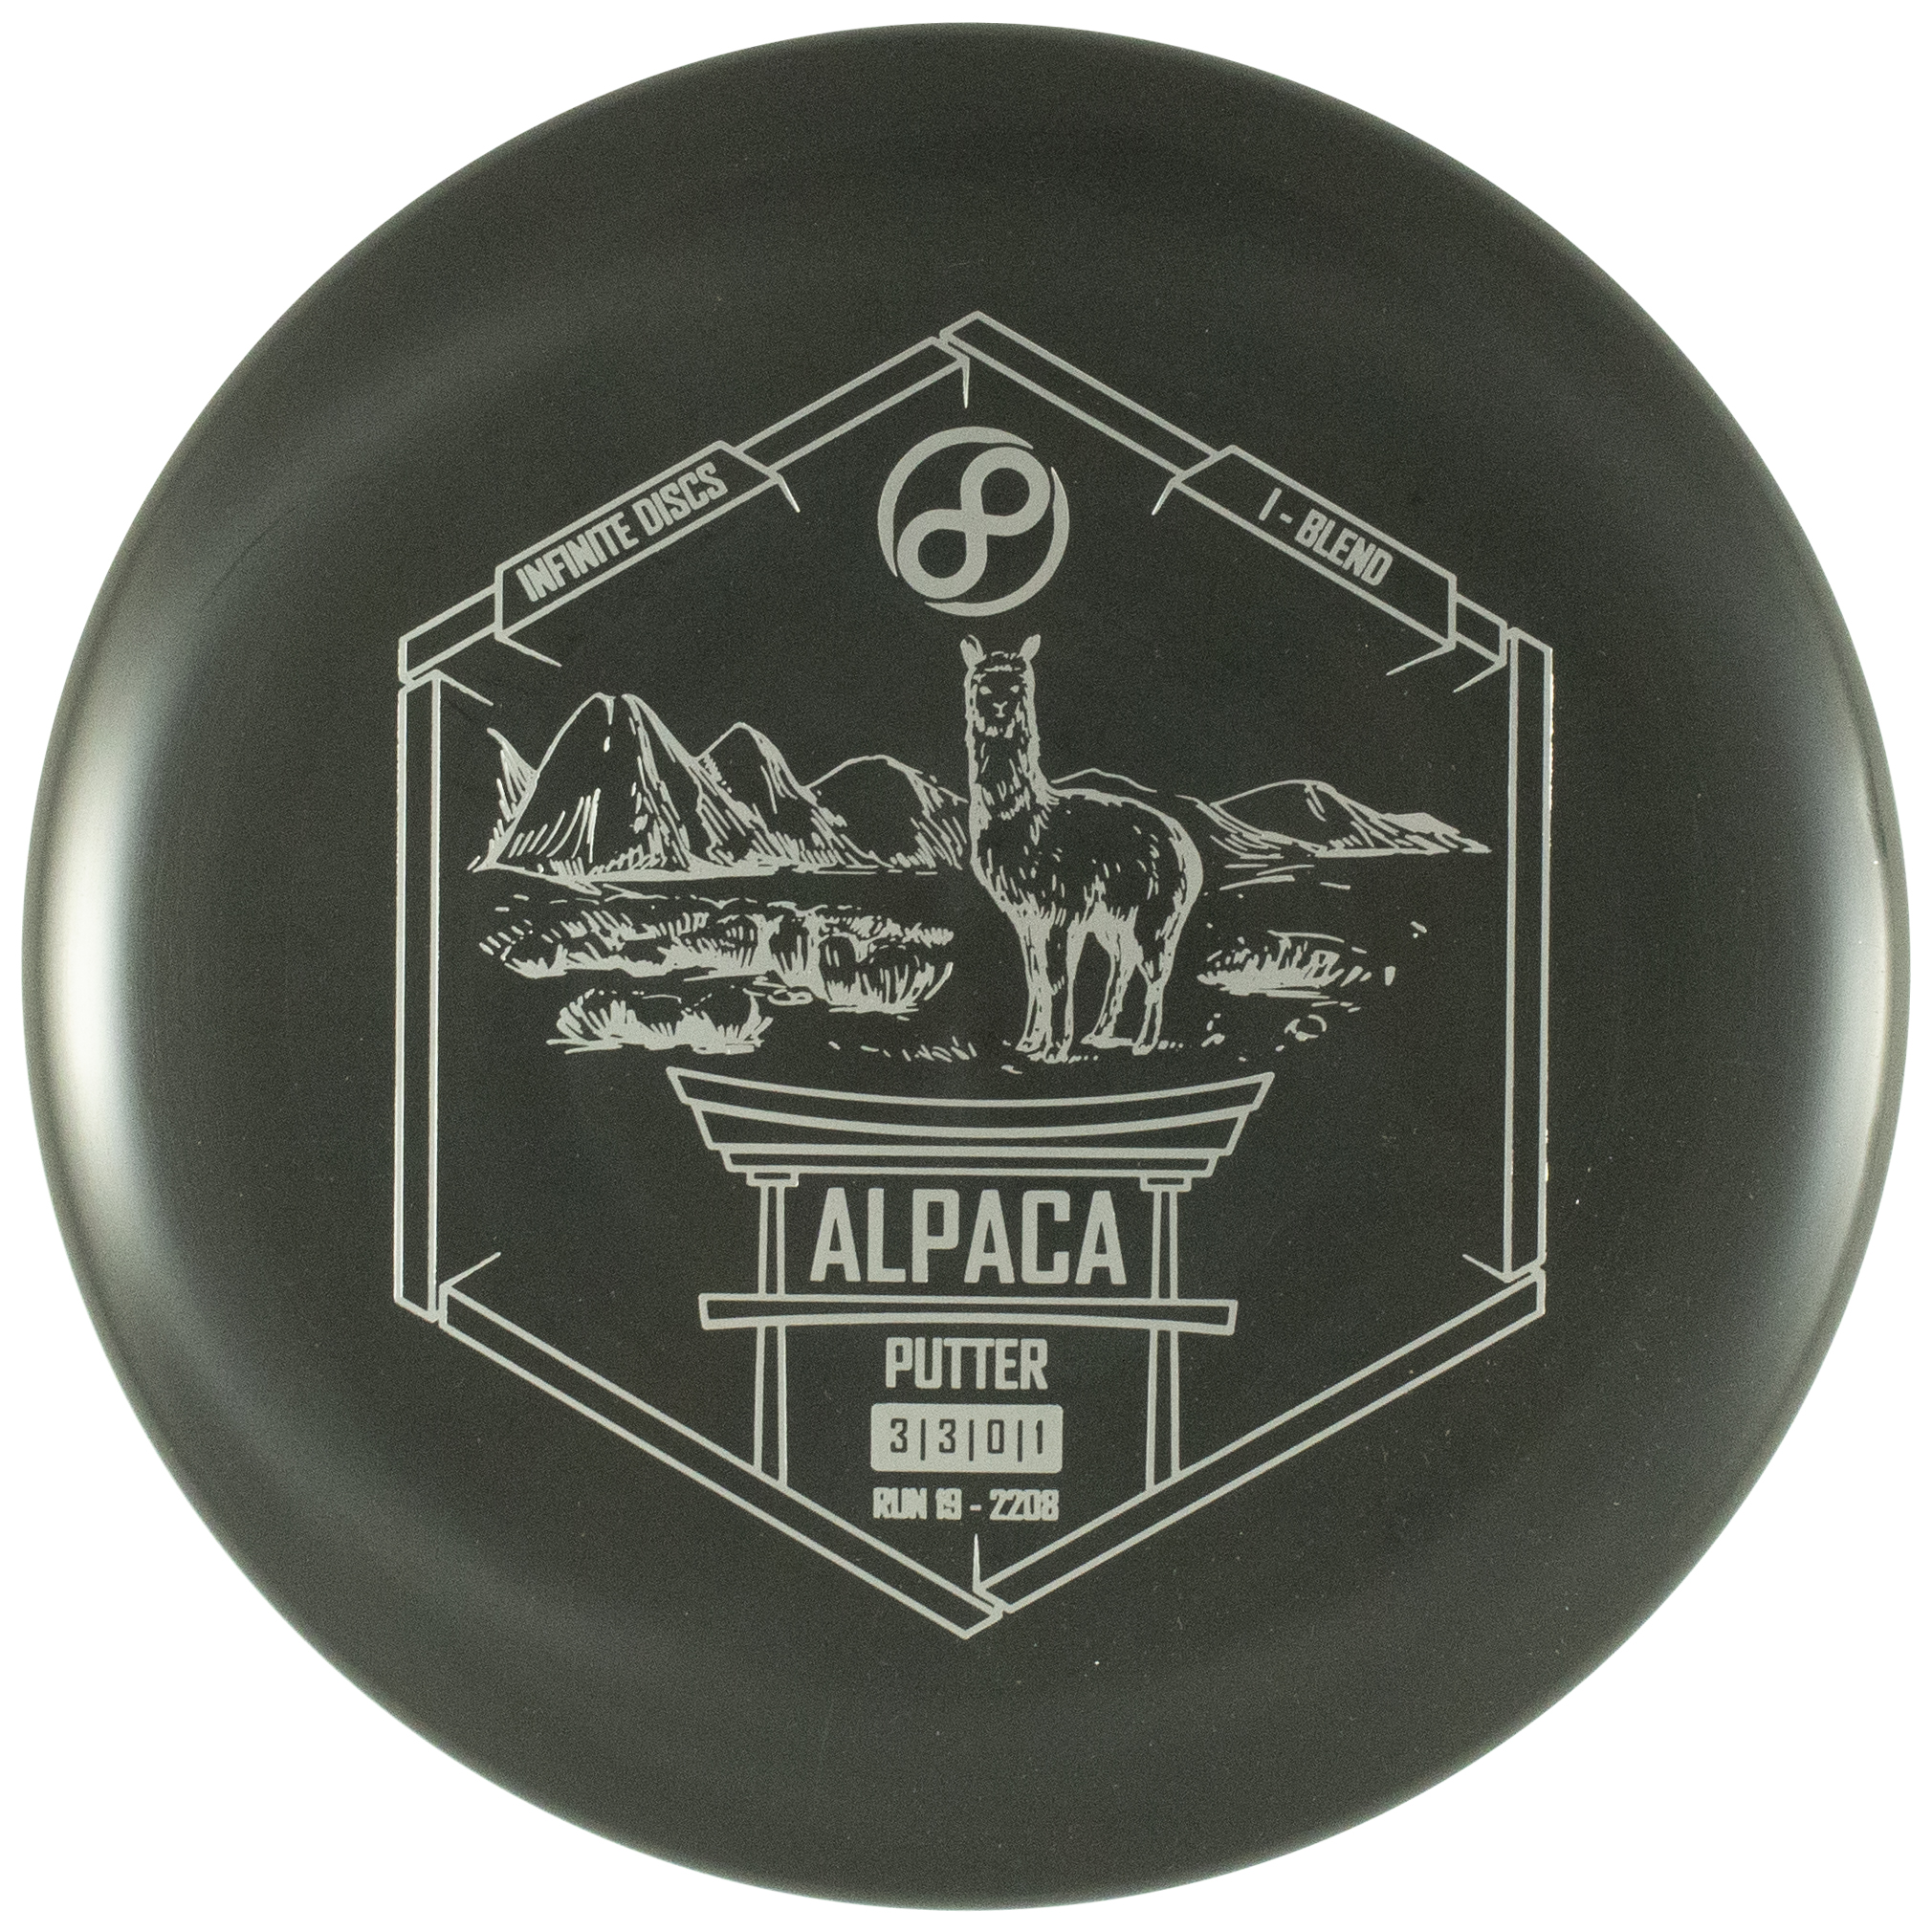 Infinite Discs Alpaca I Blend Black Memorial Day is just around the corner. We are pretty excited about this as we are going to have some sweet deals and awesome things! This disc golf sale is to help you to get ready for the Summer. After all, Summer basically starts now. So this is what we got going on for you: